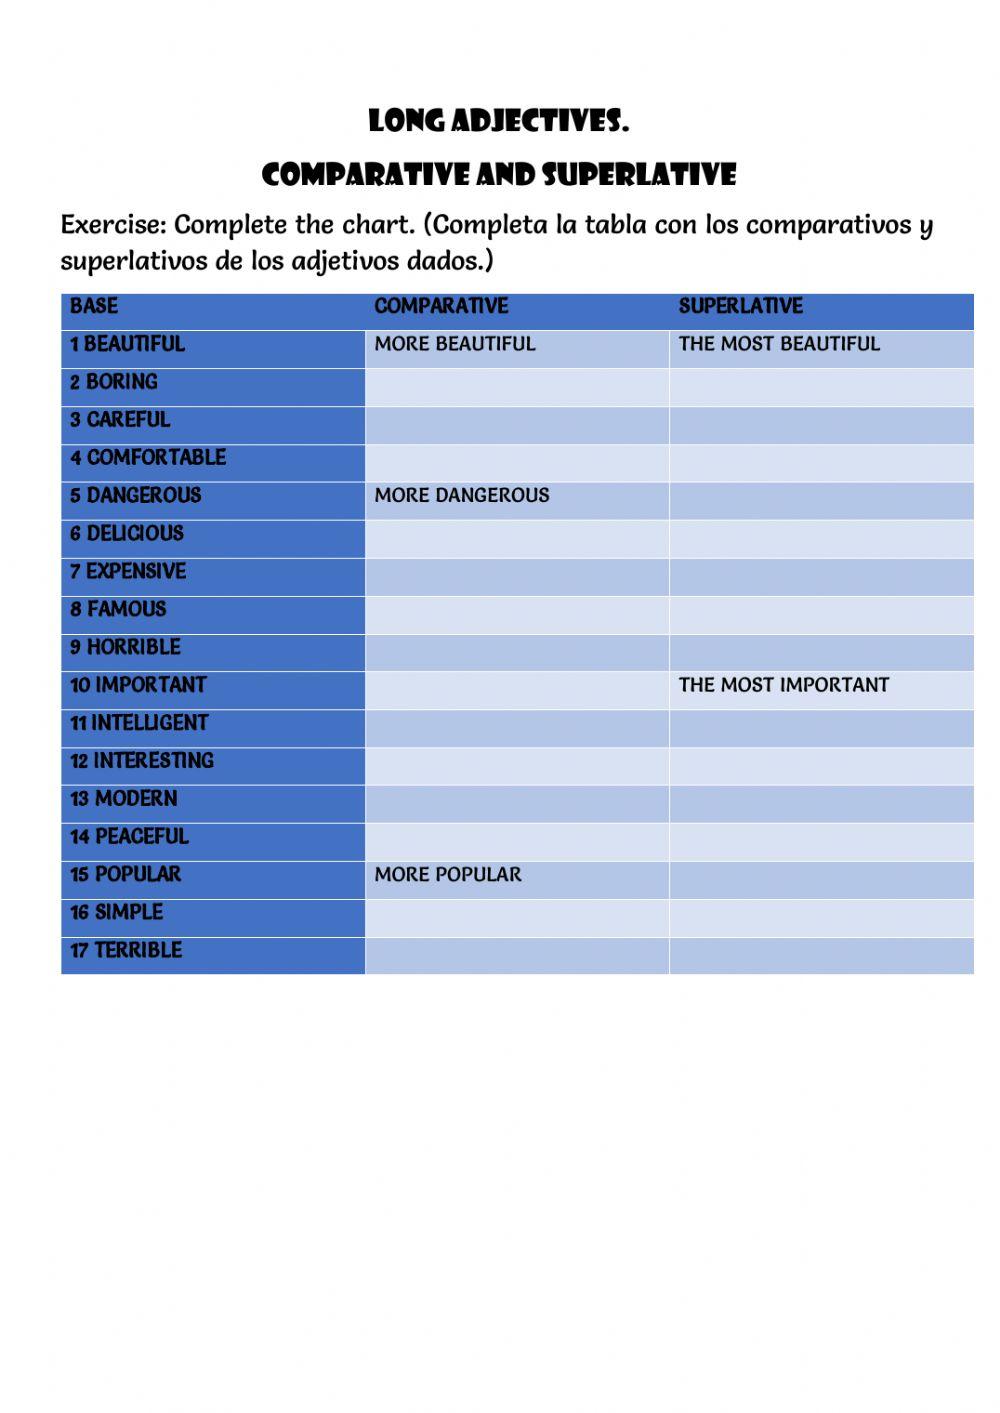 Comparatives and superlatives - long adjectives